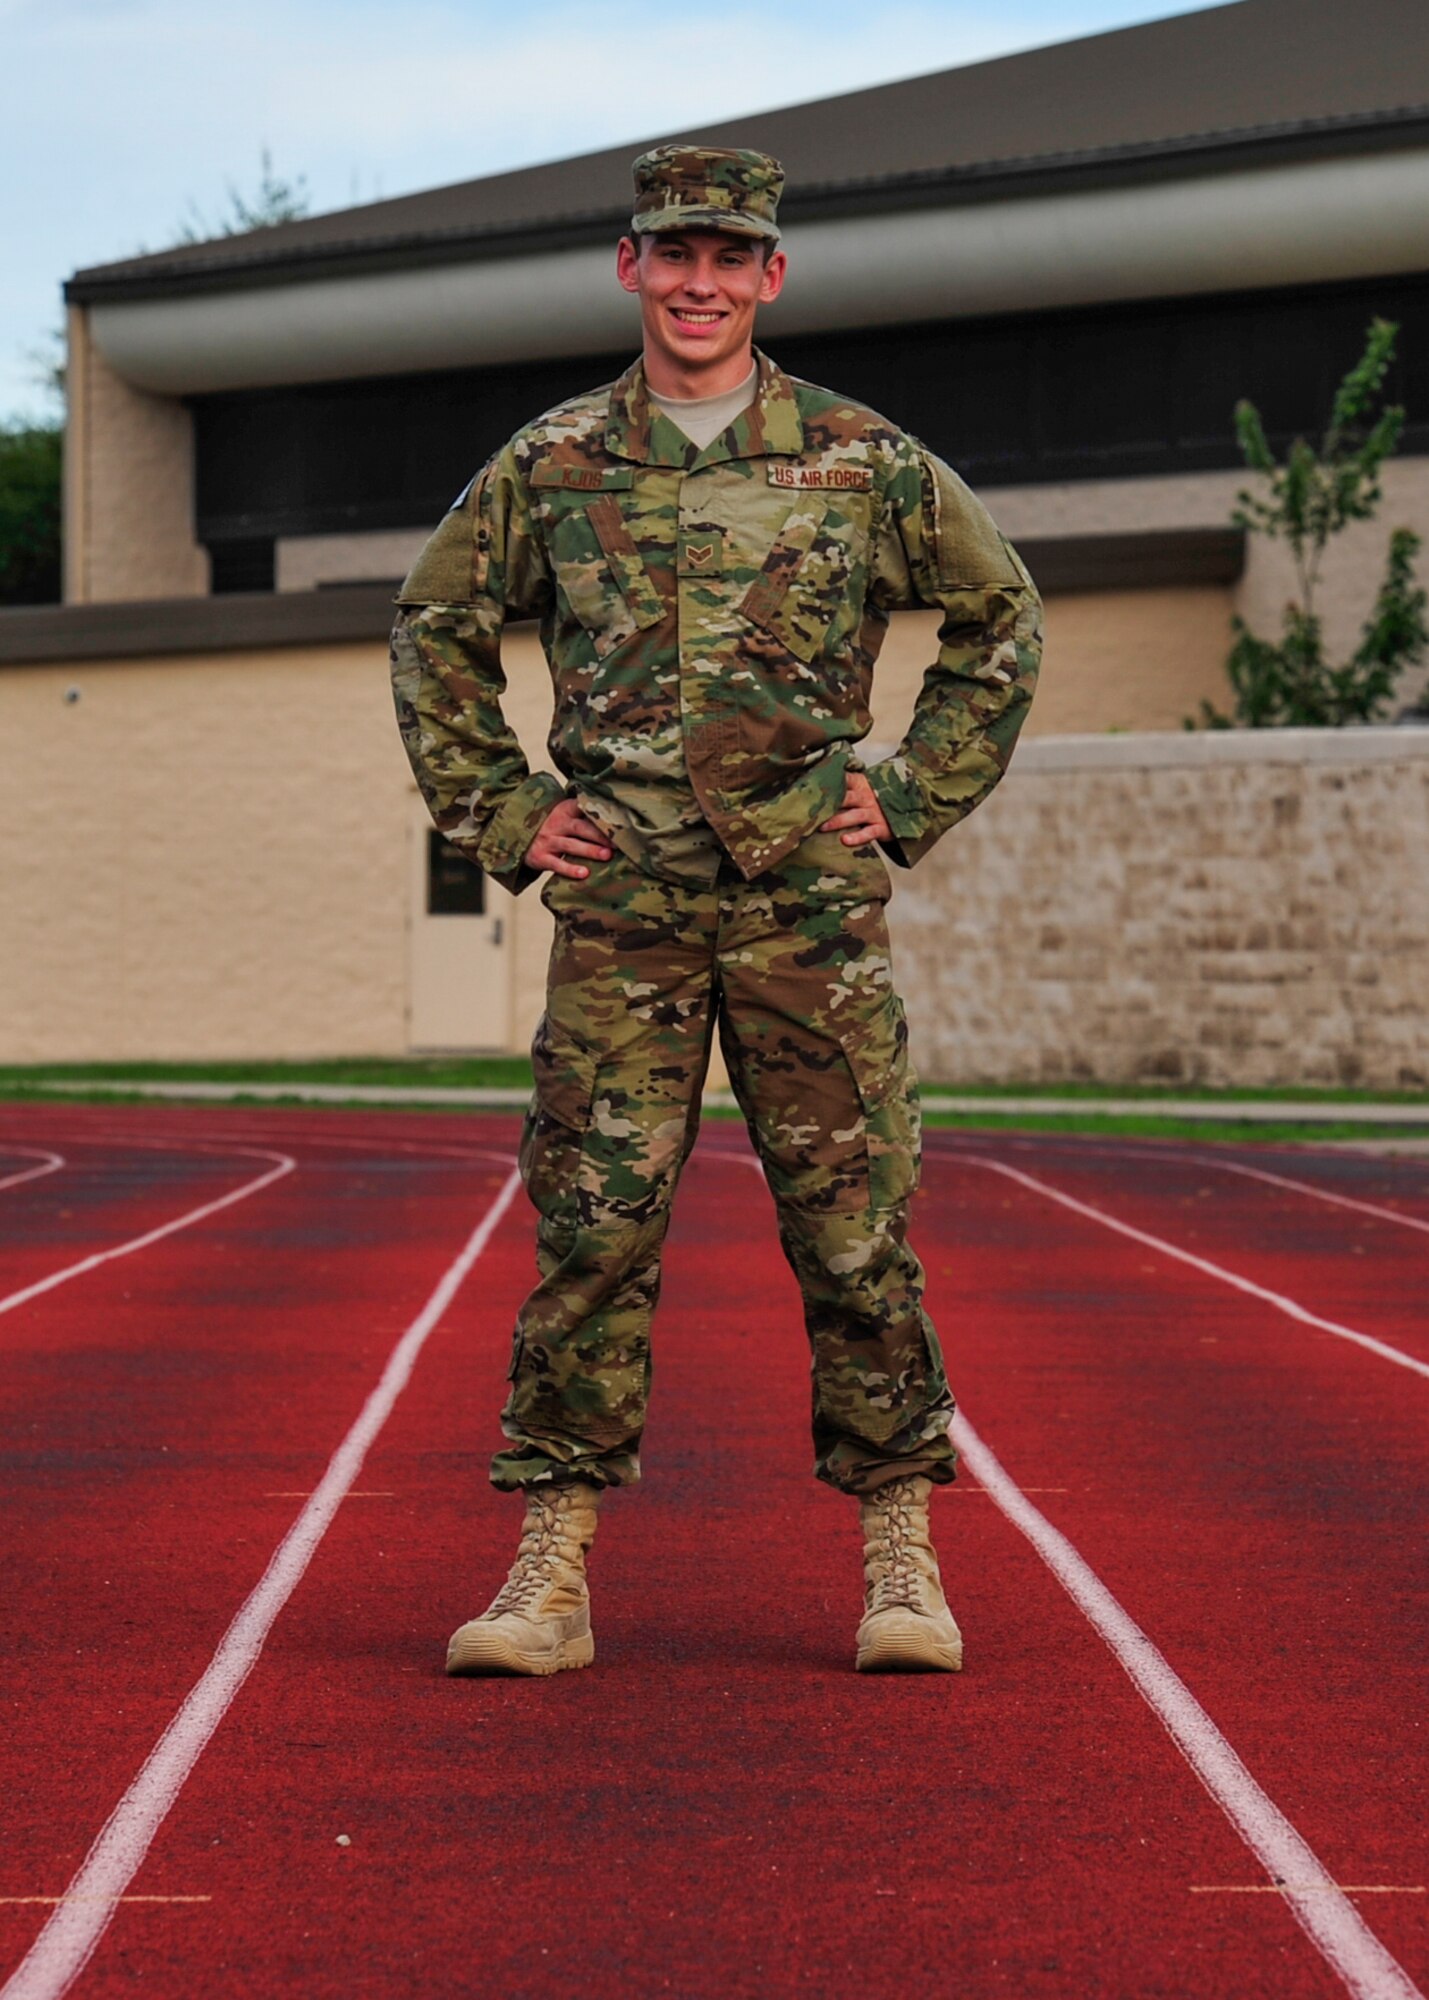 Senior Airman Nathaniel Kjos, a geospatial intelligence analyst with the 11th Special Operations Intelligence Squadron, poses for a photo at Hurlburt Field, Fla., Aug. 19, 2016. Kjos is one of the four Airmen representing Hurlburt Field as part of the Air Force Special Operations Command's 10-man marathon team that is scheduled to participate in the Air Force Marathon.